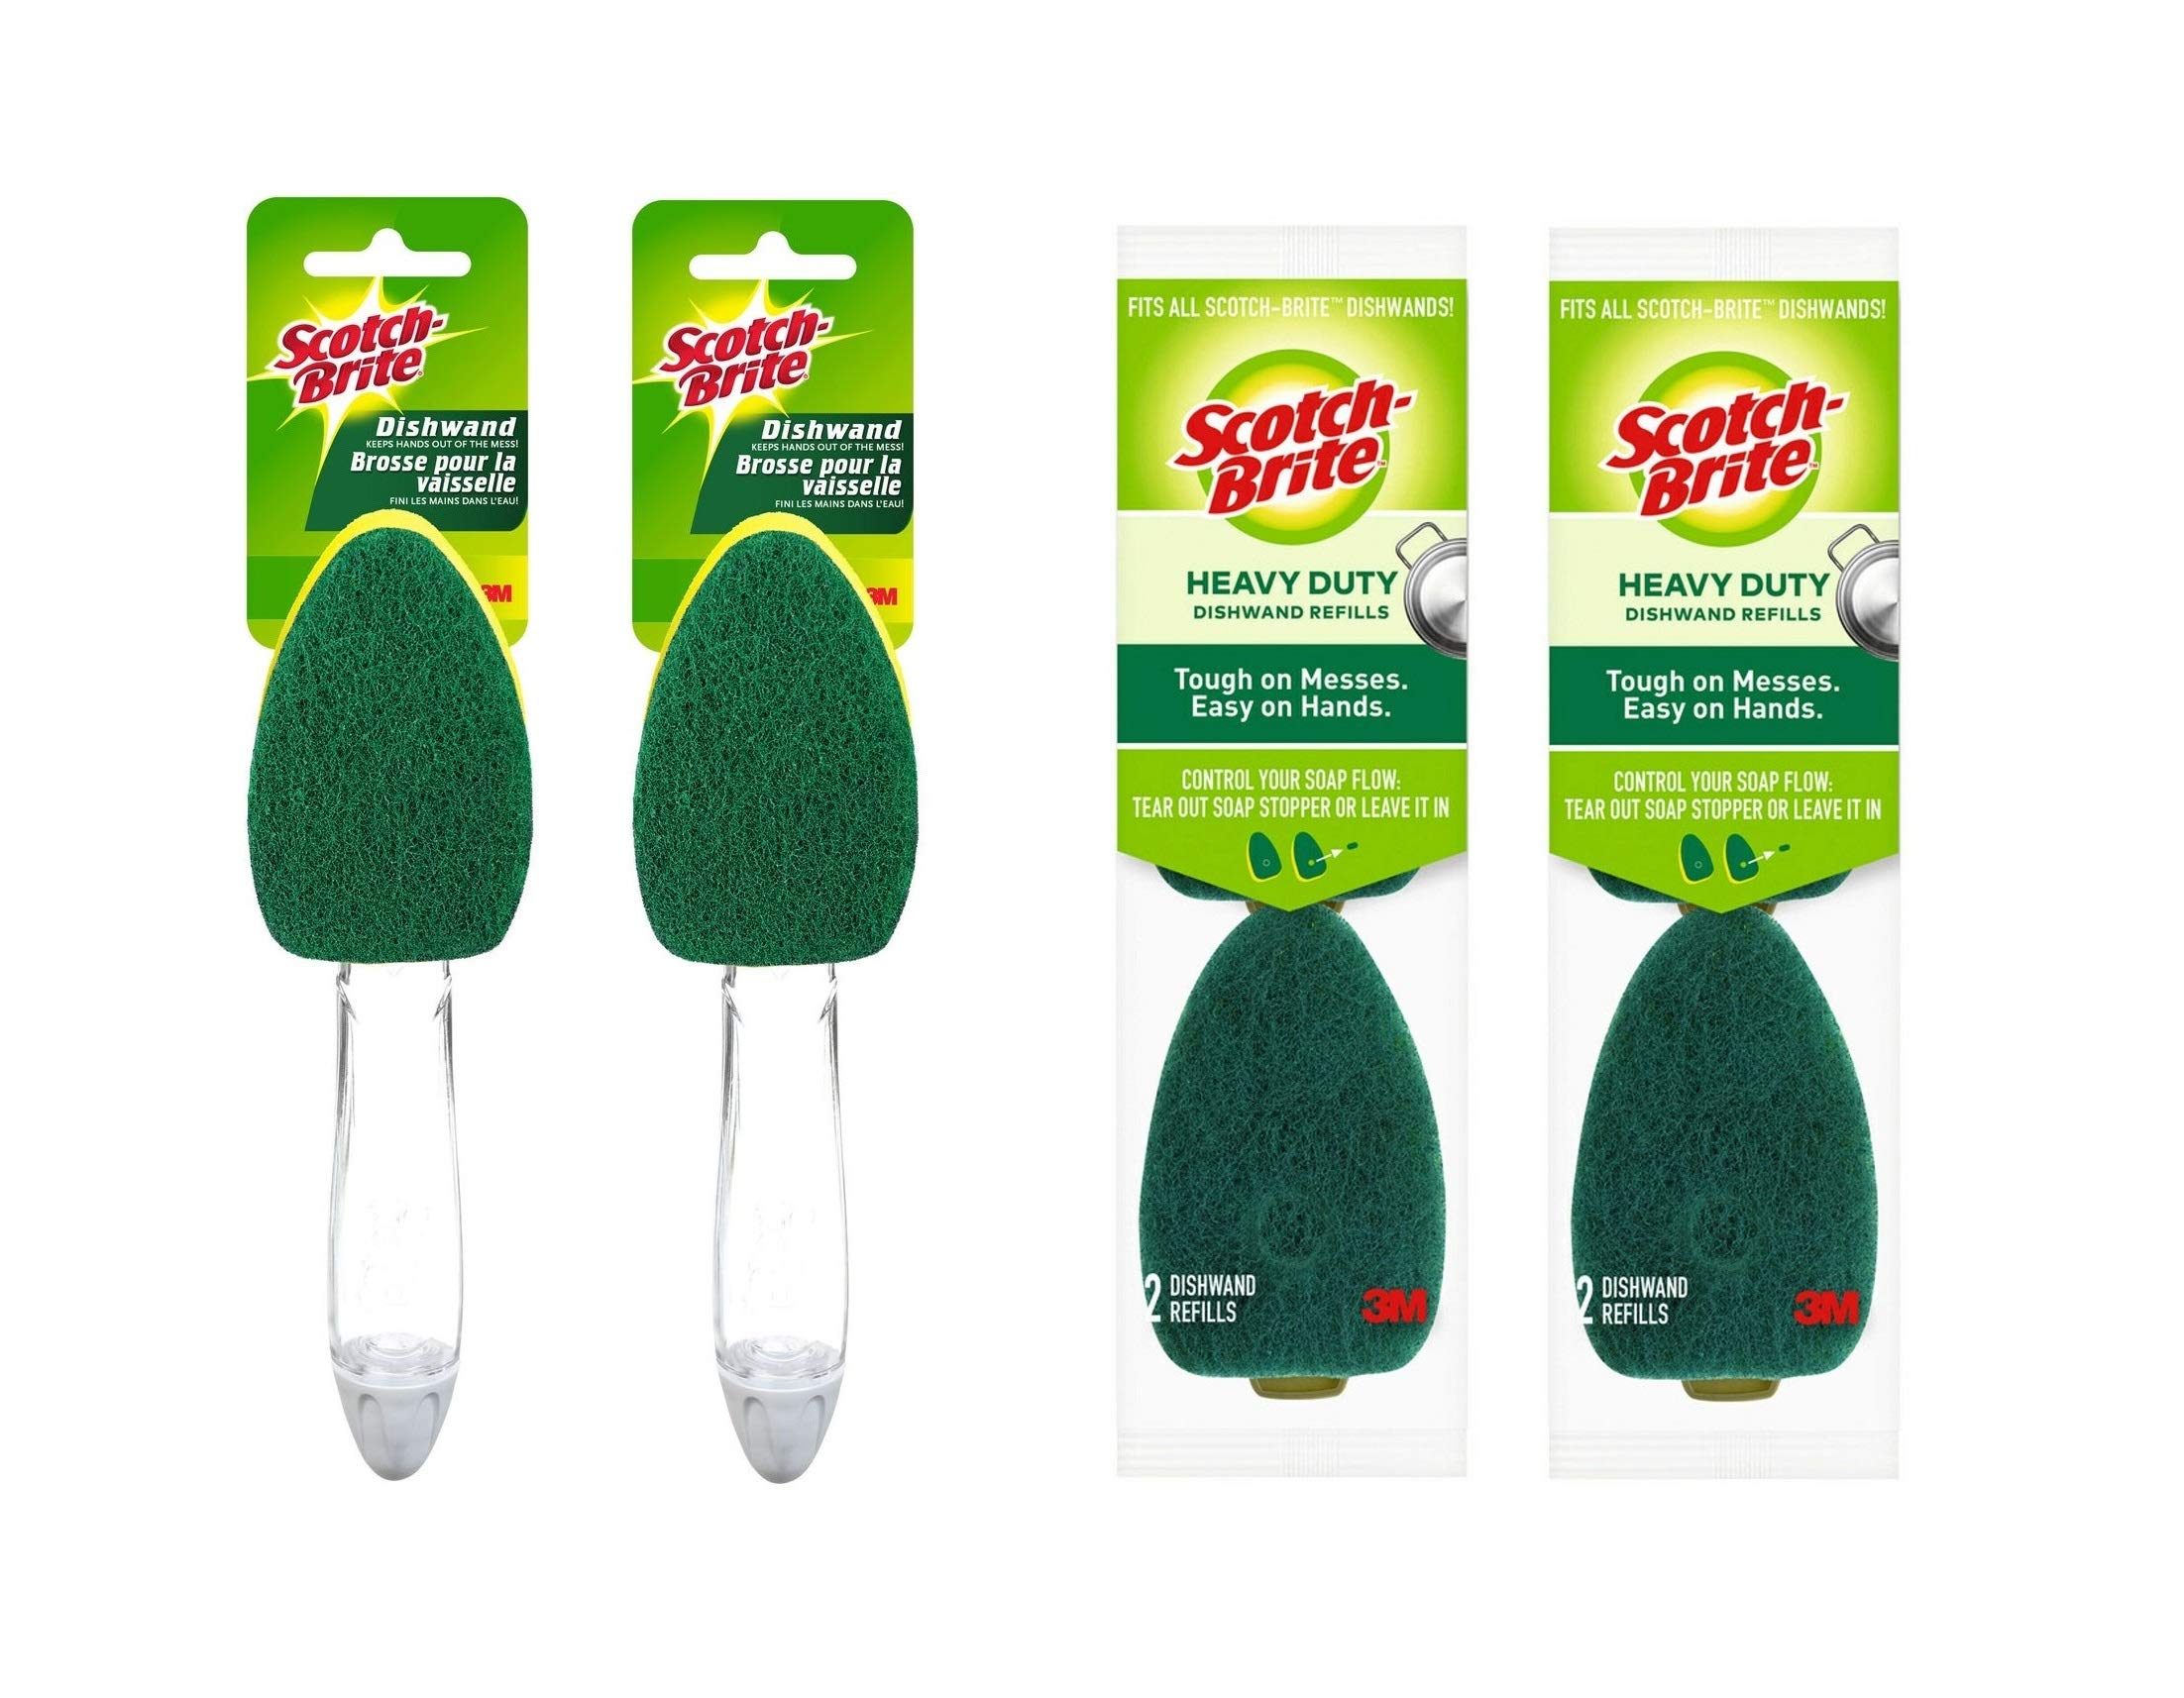 Scotch-Brite Glass Cooktop Wand Replacement Heads, Cleans With Just Water,  Tackle Burnt-On Messes, 2 Replacement Heads